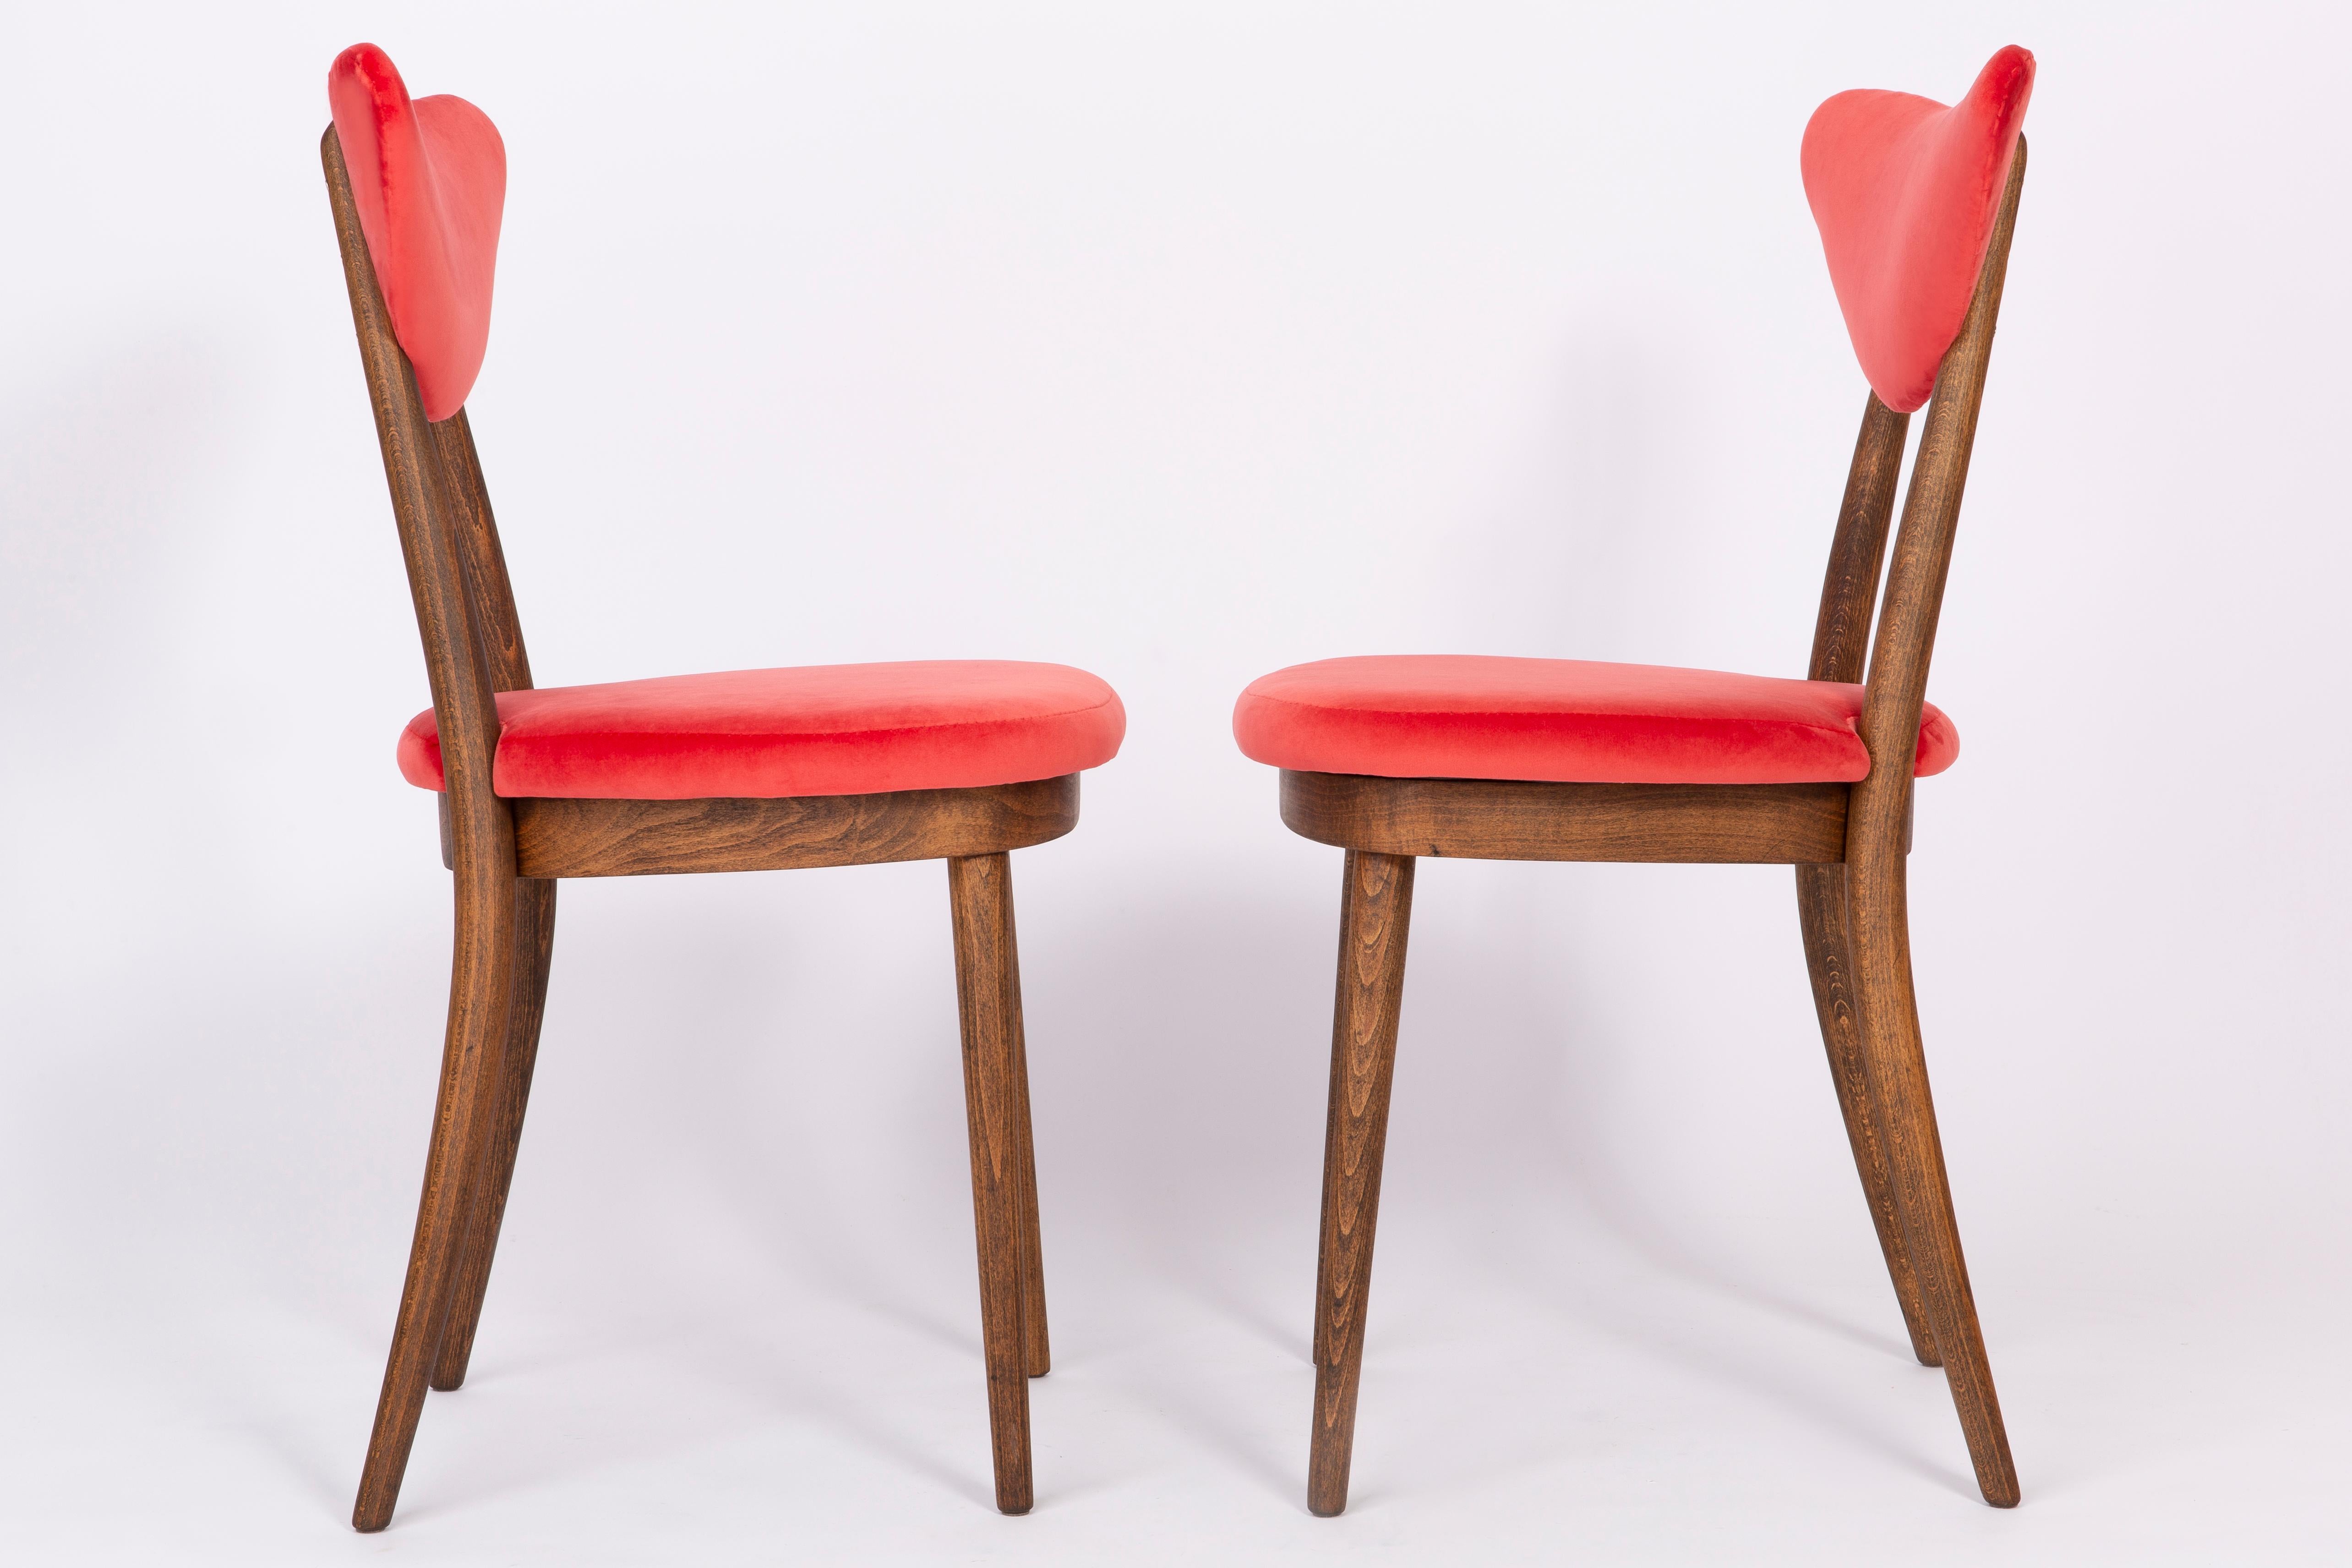 Hand-Crafted Set of Two Red Heart Chairs, Poland, 1960s For Sale